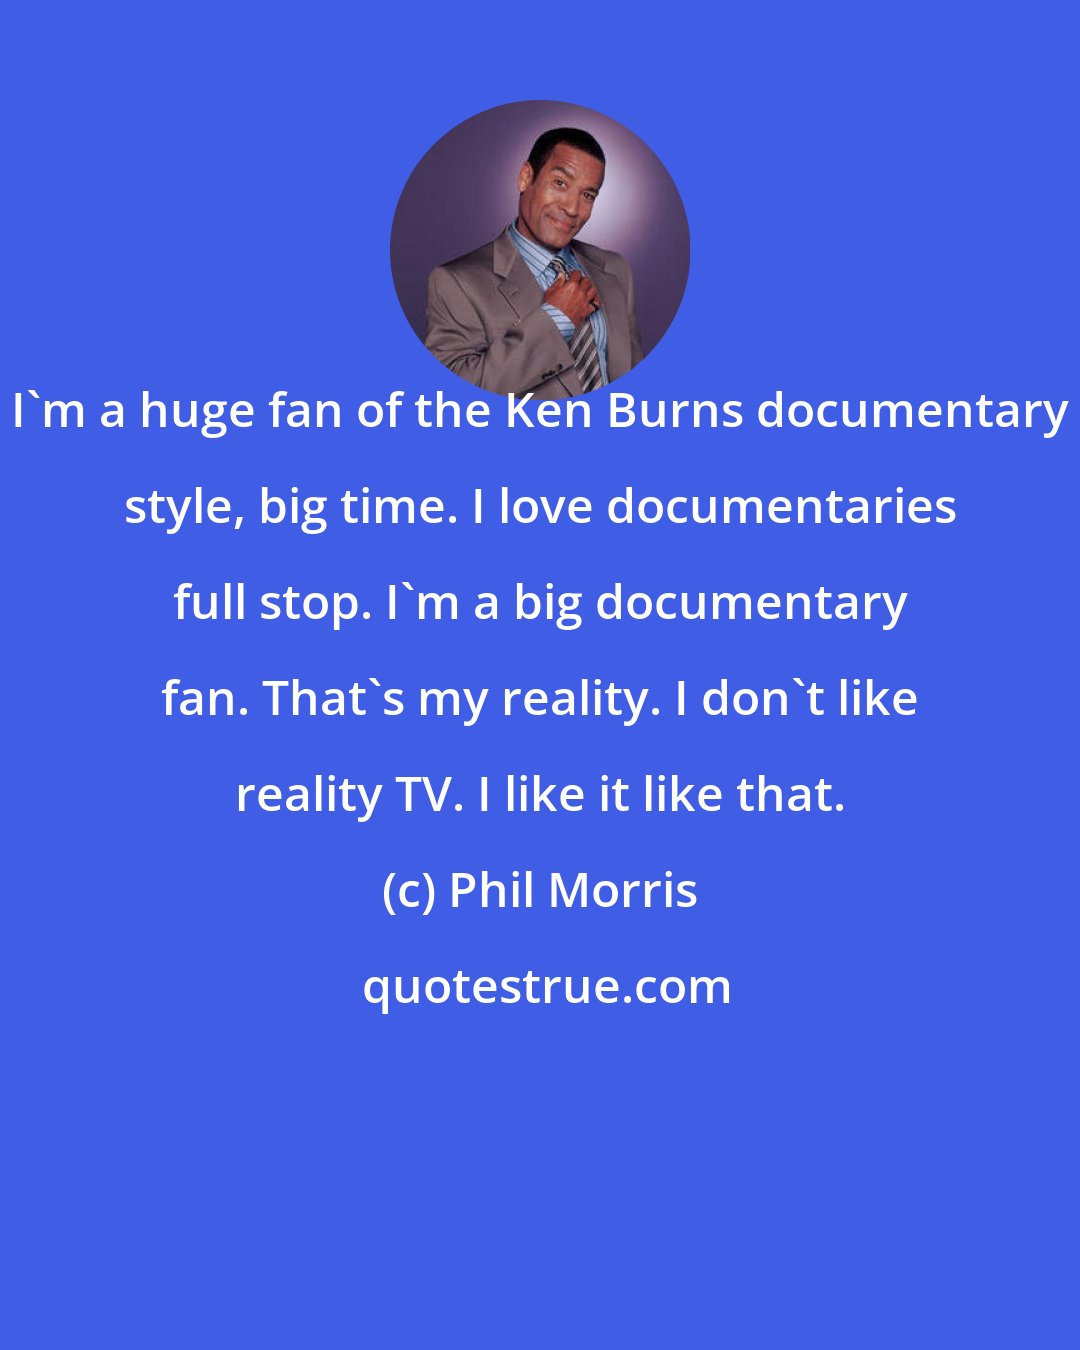 Phil Morris: I'm a huge fan of the Ken Burns documentary style, big time. I love documentaries full stop. I'm a big documentary fan. That's my reality. I don't like reality TV. I like it like that.